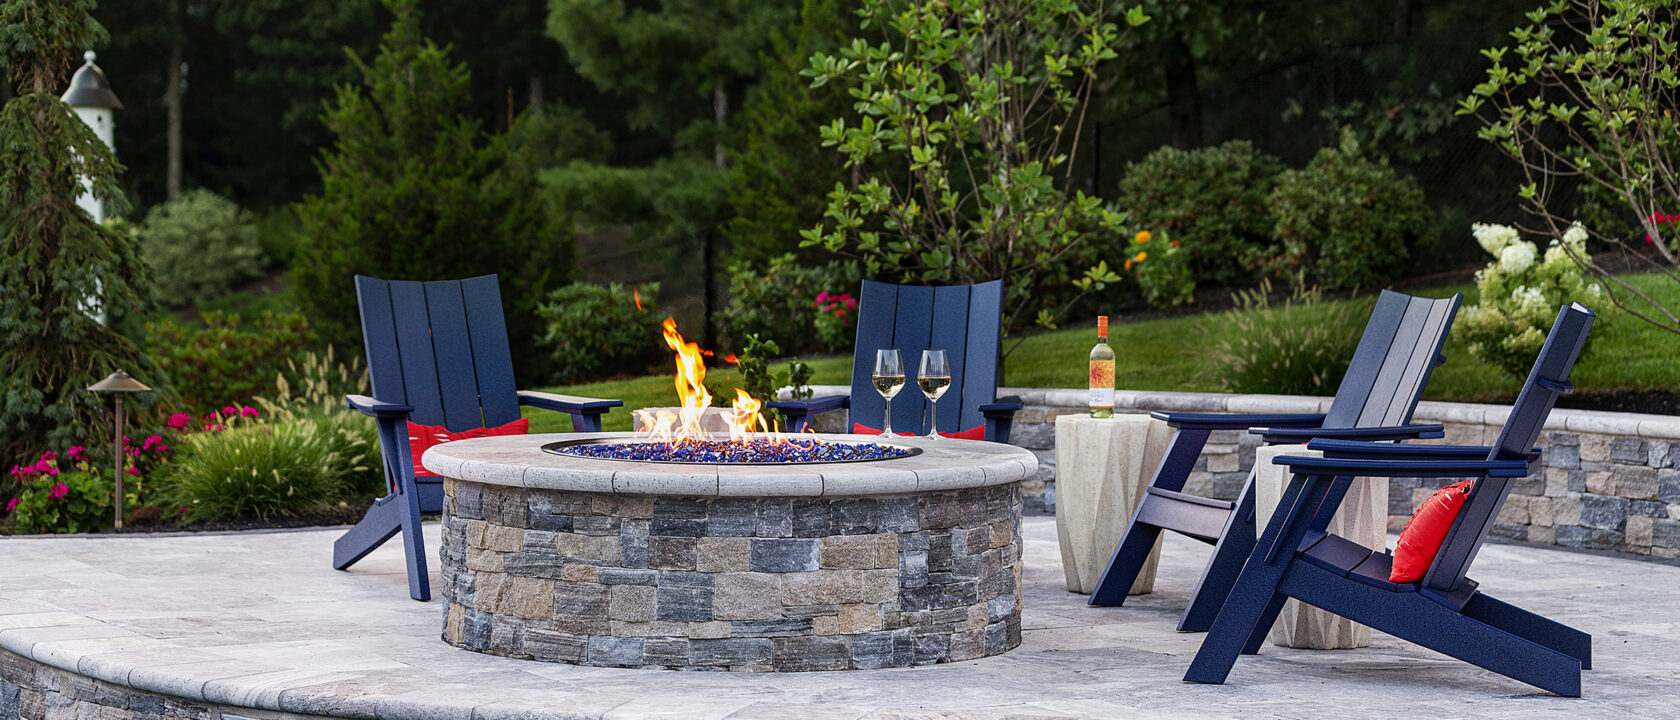 Fire Pit and Chairs